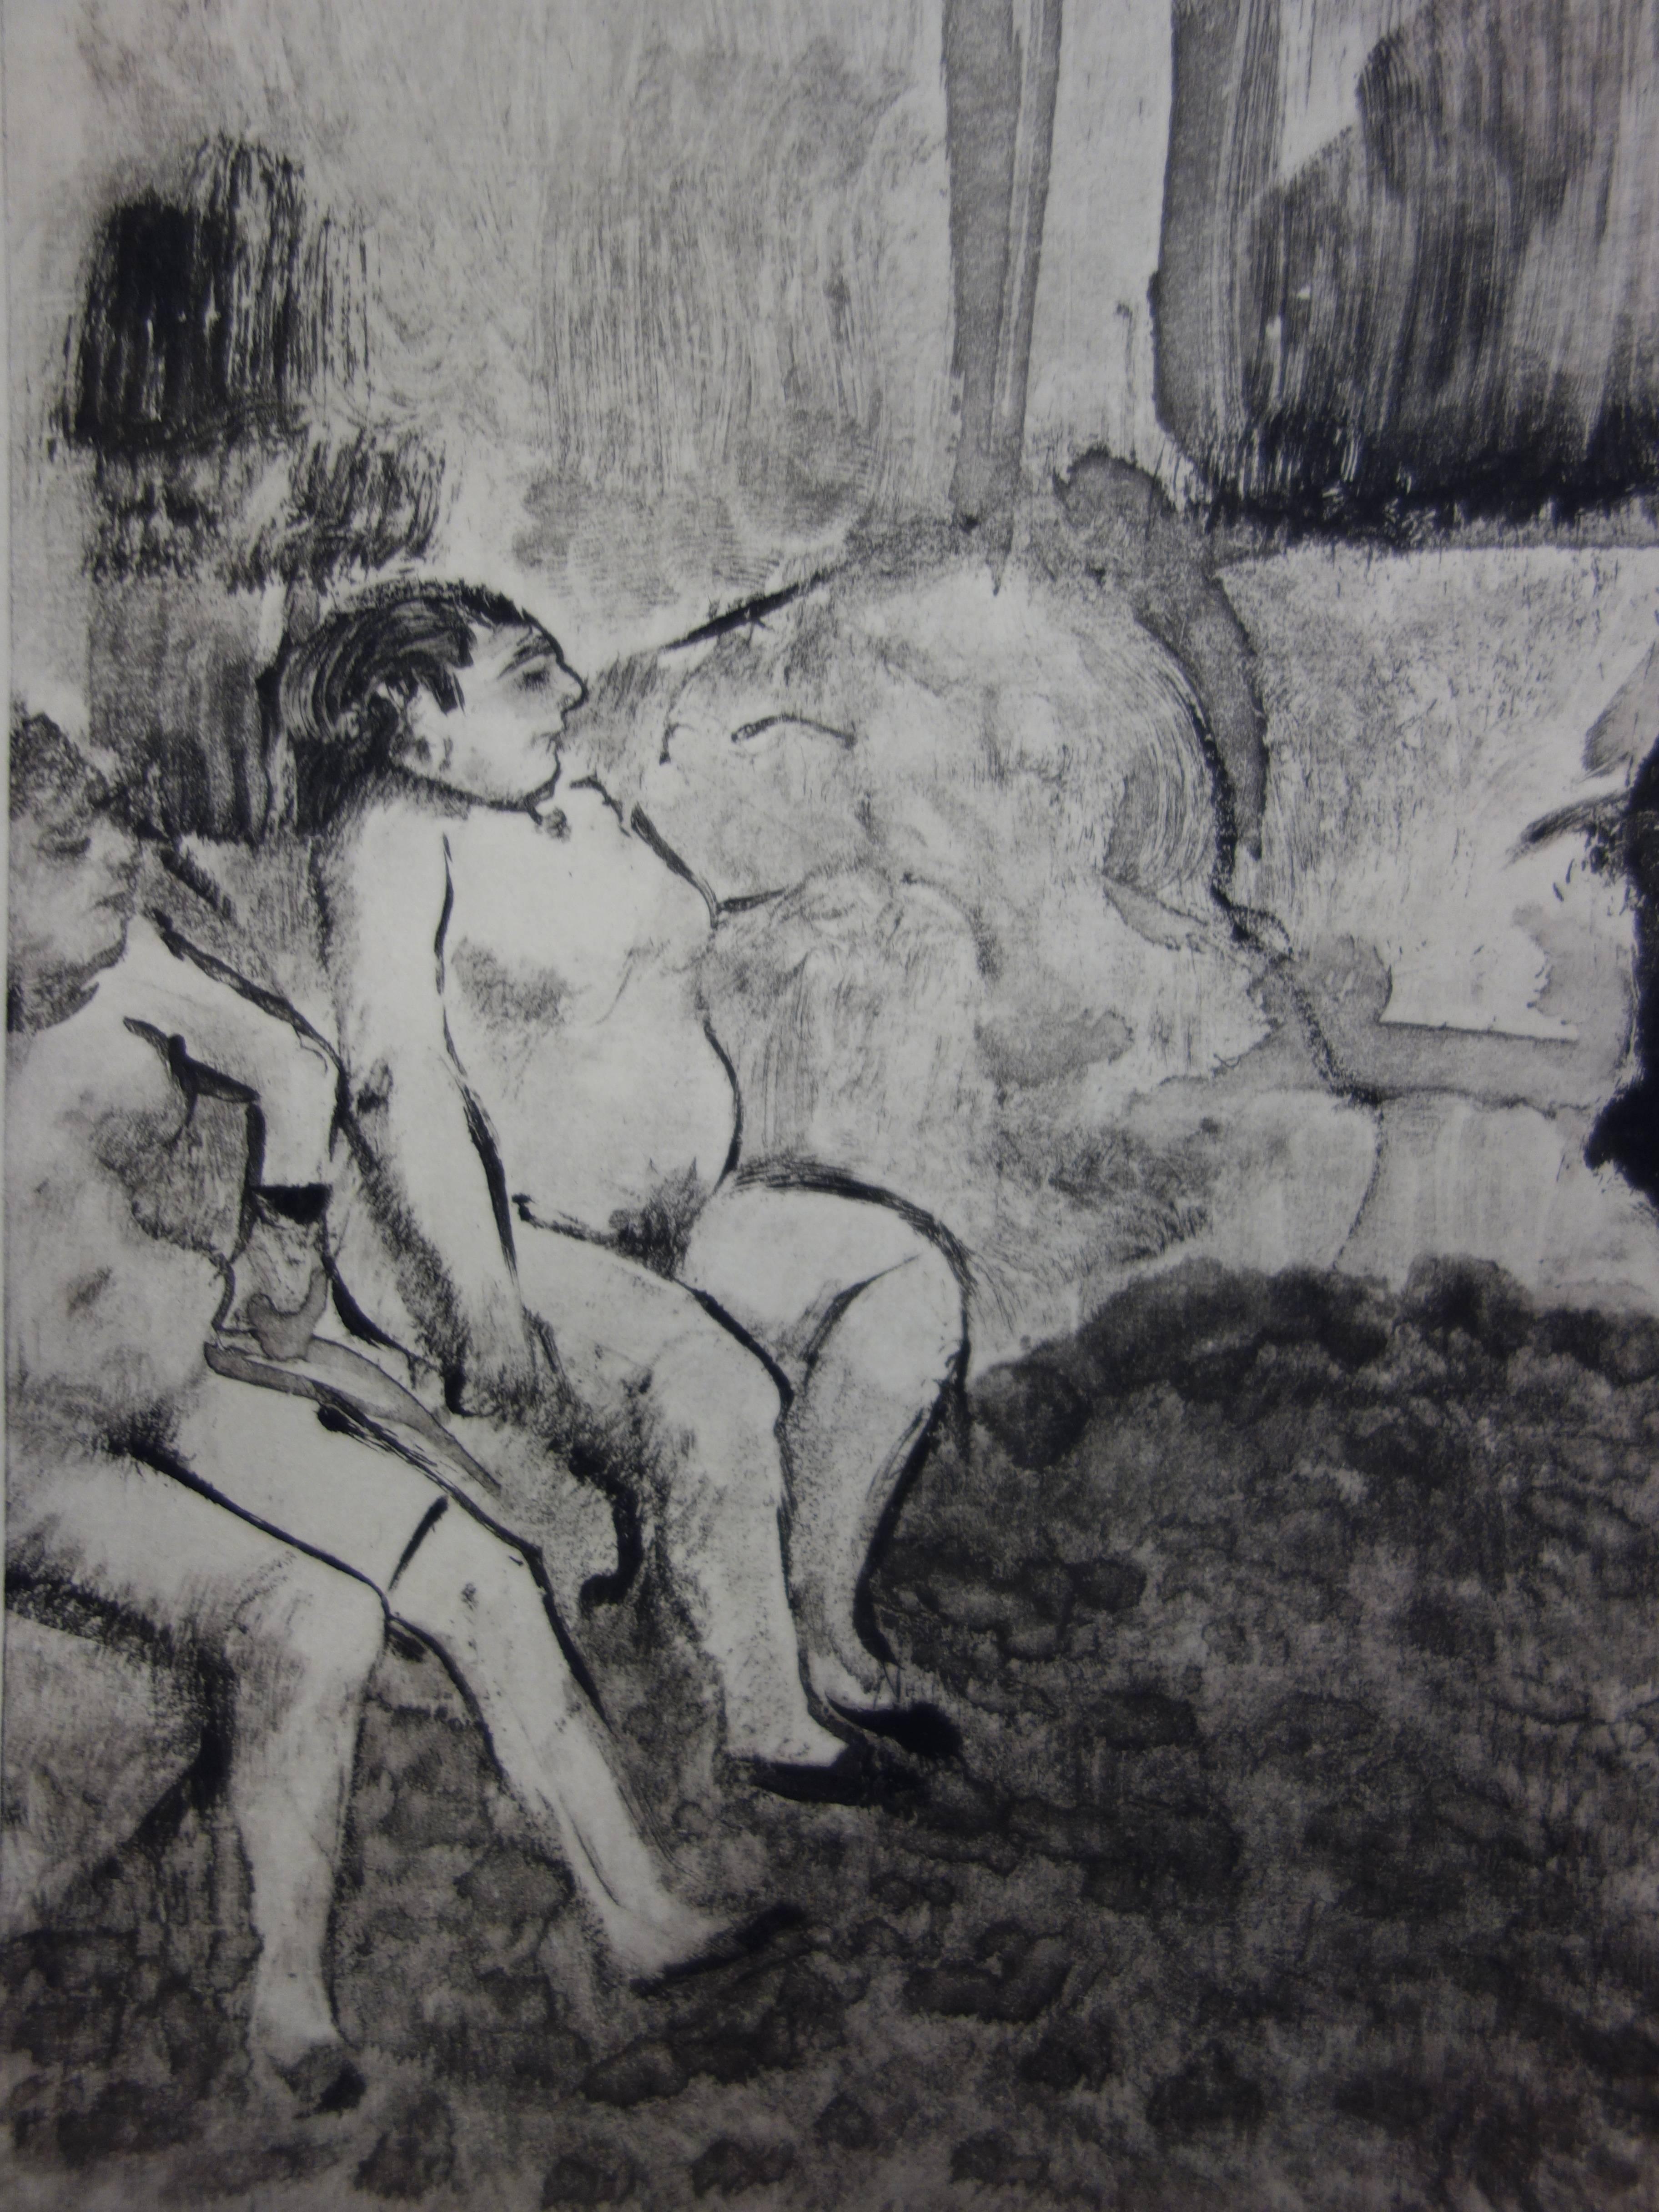 Two Women : a Delicate Choice - Original etching - Gray Figurative Print by (after) Edgar Degas